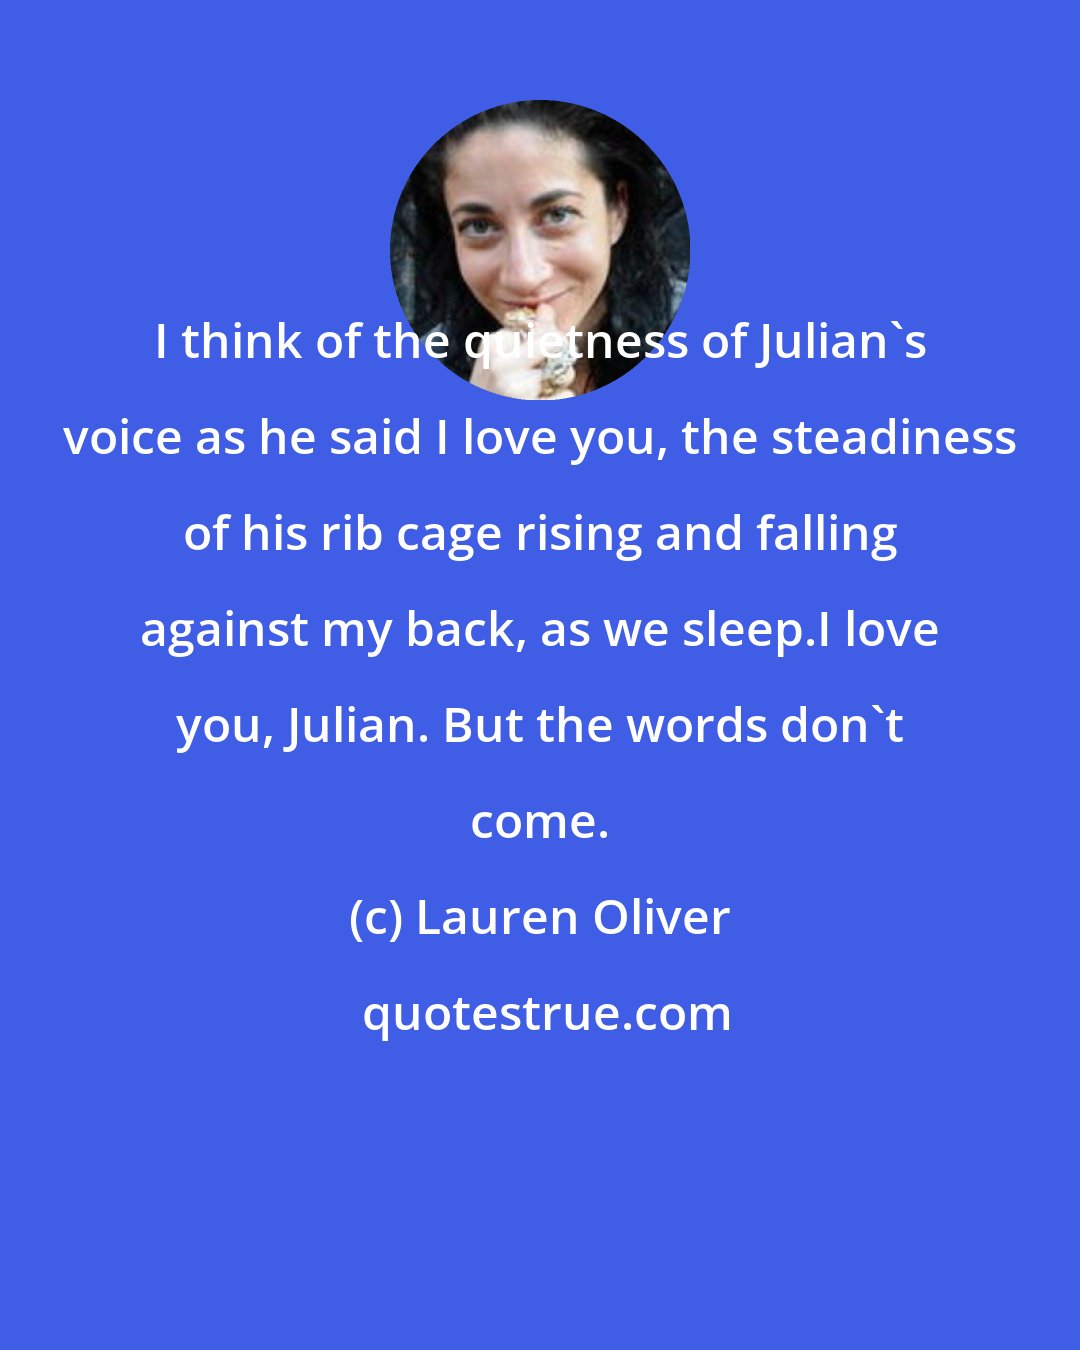 Lauren Oliver: I think of the quietness of Julian's voice as he said I love you, the steadiness of his rib cage rising and falling against my back, as we sleep.I love you, Julian. But the words don't come.